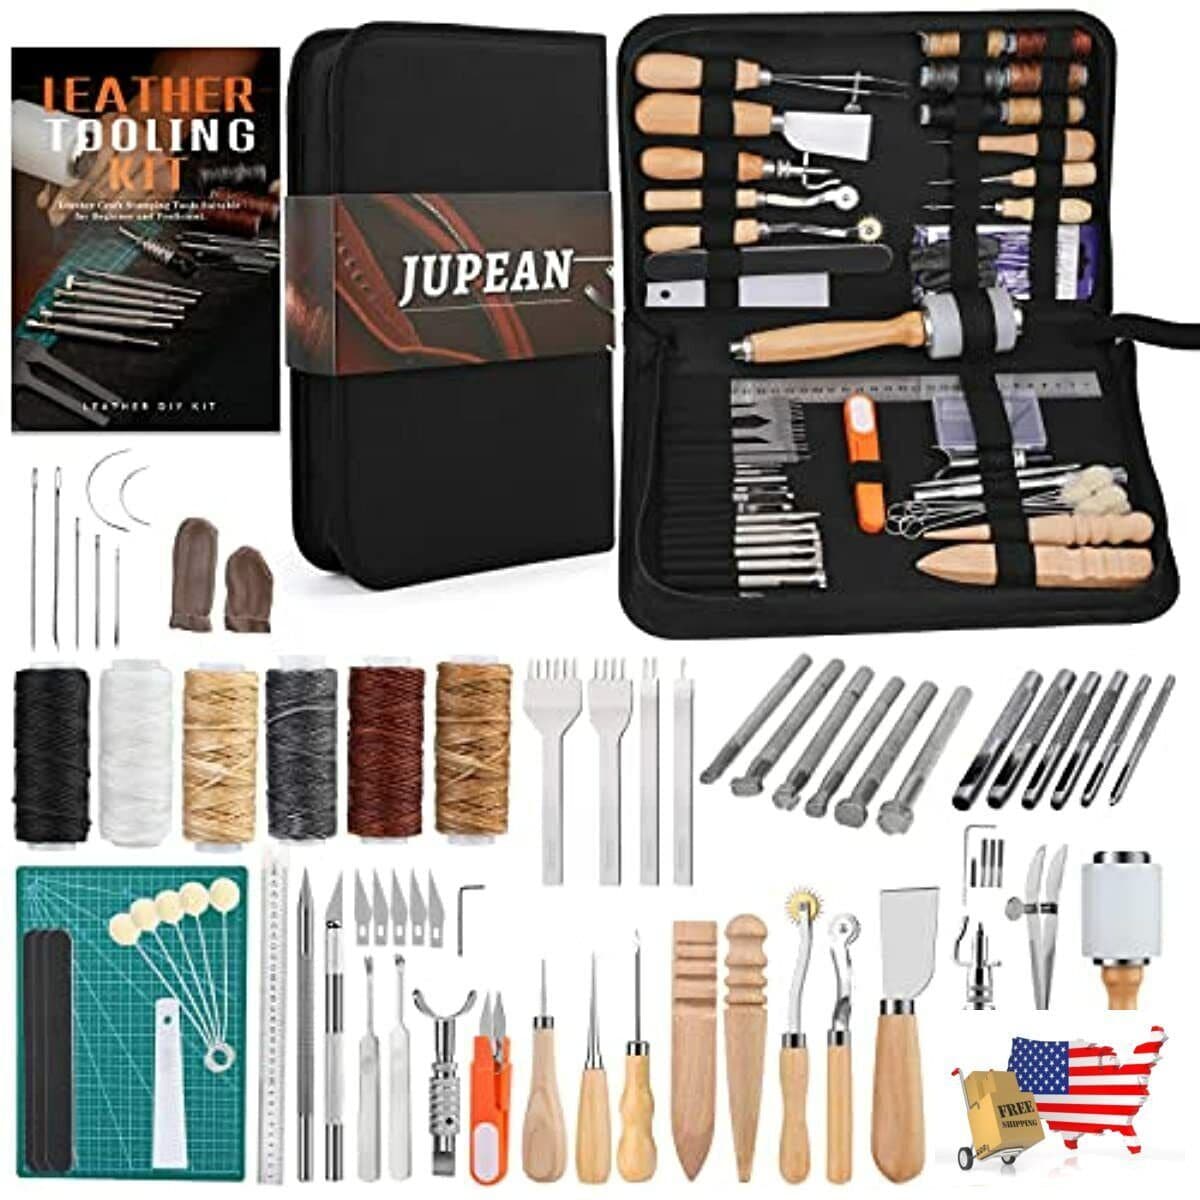  Professional Leather Working Craft Kit, DIY Making High Carbon  Steel Wooden Handles 16 Models 28PCS Leather Crafting Supplies for  Leathercraft Adults Gifts